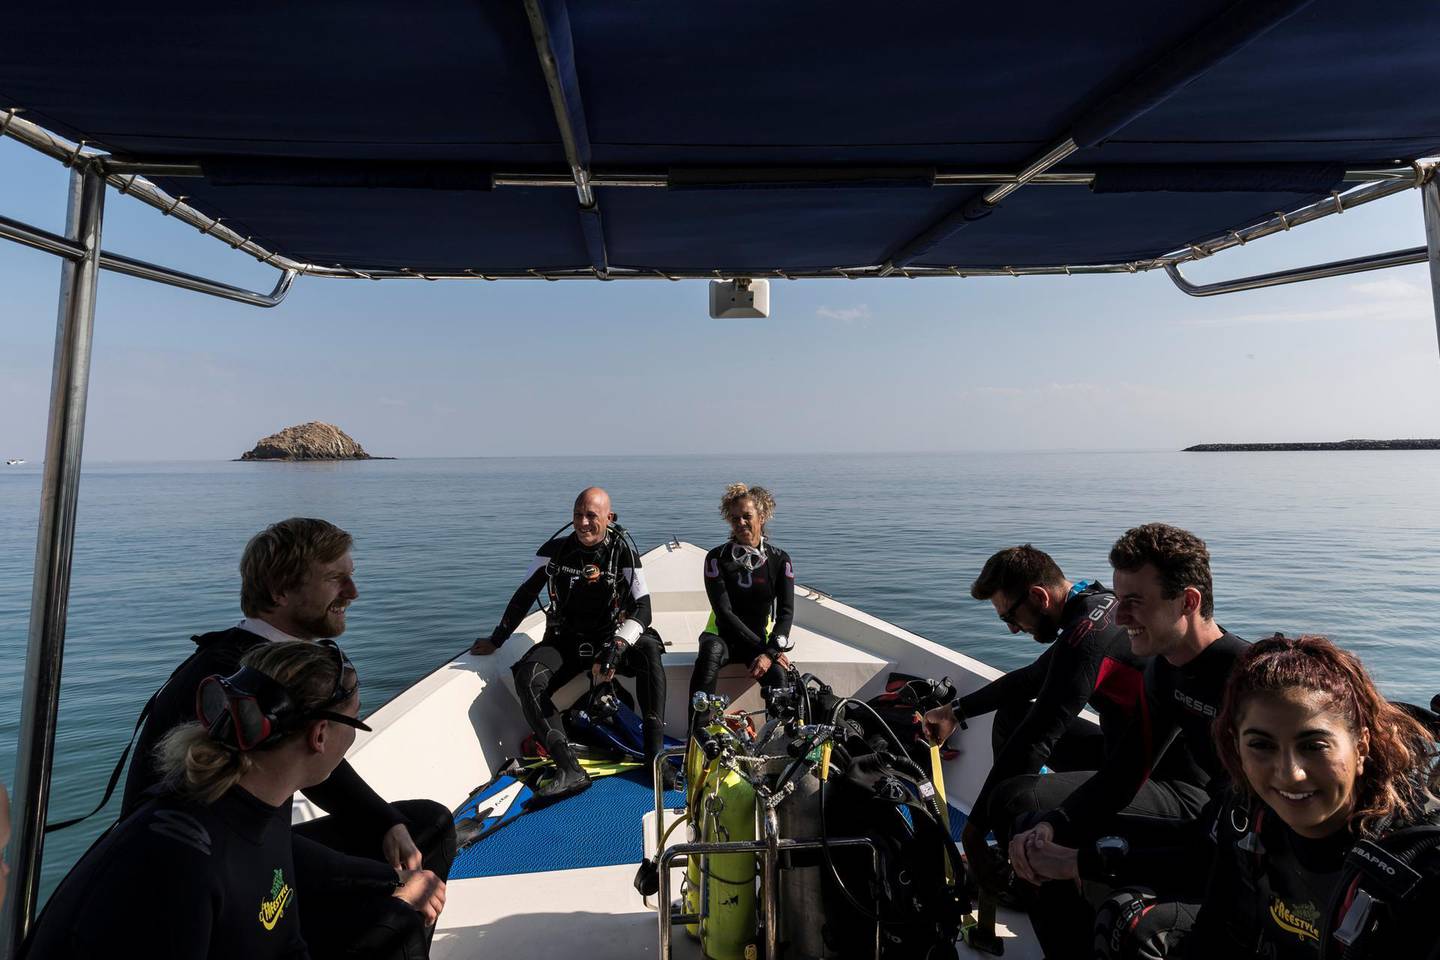 DIBBA, UNITED ARAB EMIRATES. 19 JANUARY 2018. Fernando Reis from Shark Educational Institute and a team of divers on a dive in the protected marine reserve by Dibba Rock to observe the sharks in the area. (Photo: Antonie Robertson/The National) Journalist: Nick Webster. Section: National.